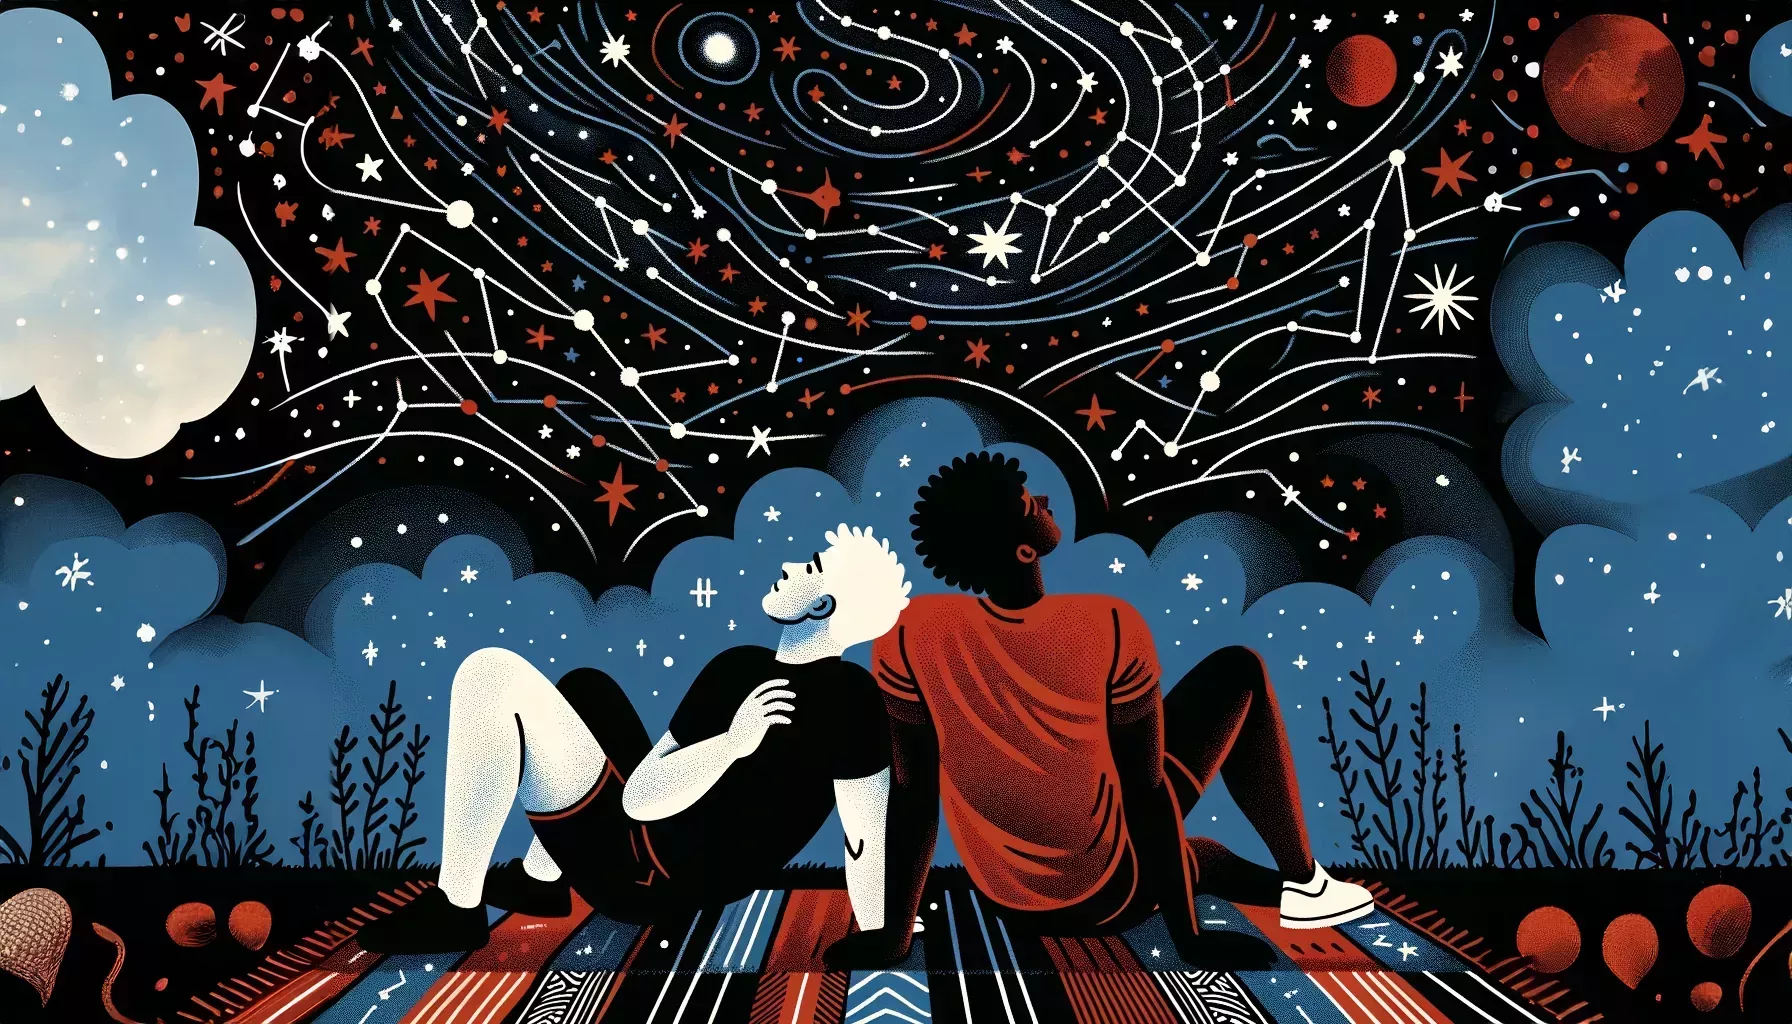 an illustration of two gay men on a date, engaging in a stargazing trip, reclining closely on a blanket with a backdrop of a vivid night sky rendered in abstract patterns. The stars and constellations are illustrated using a striking color palette of red, black, and white.